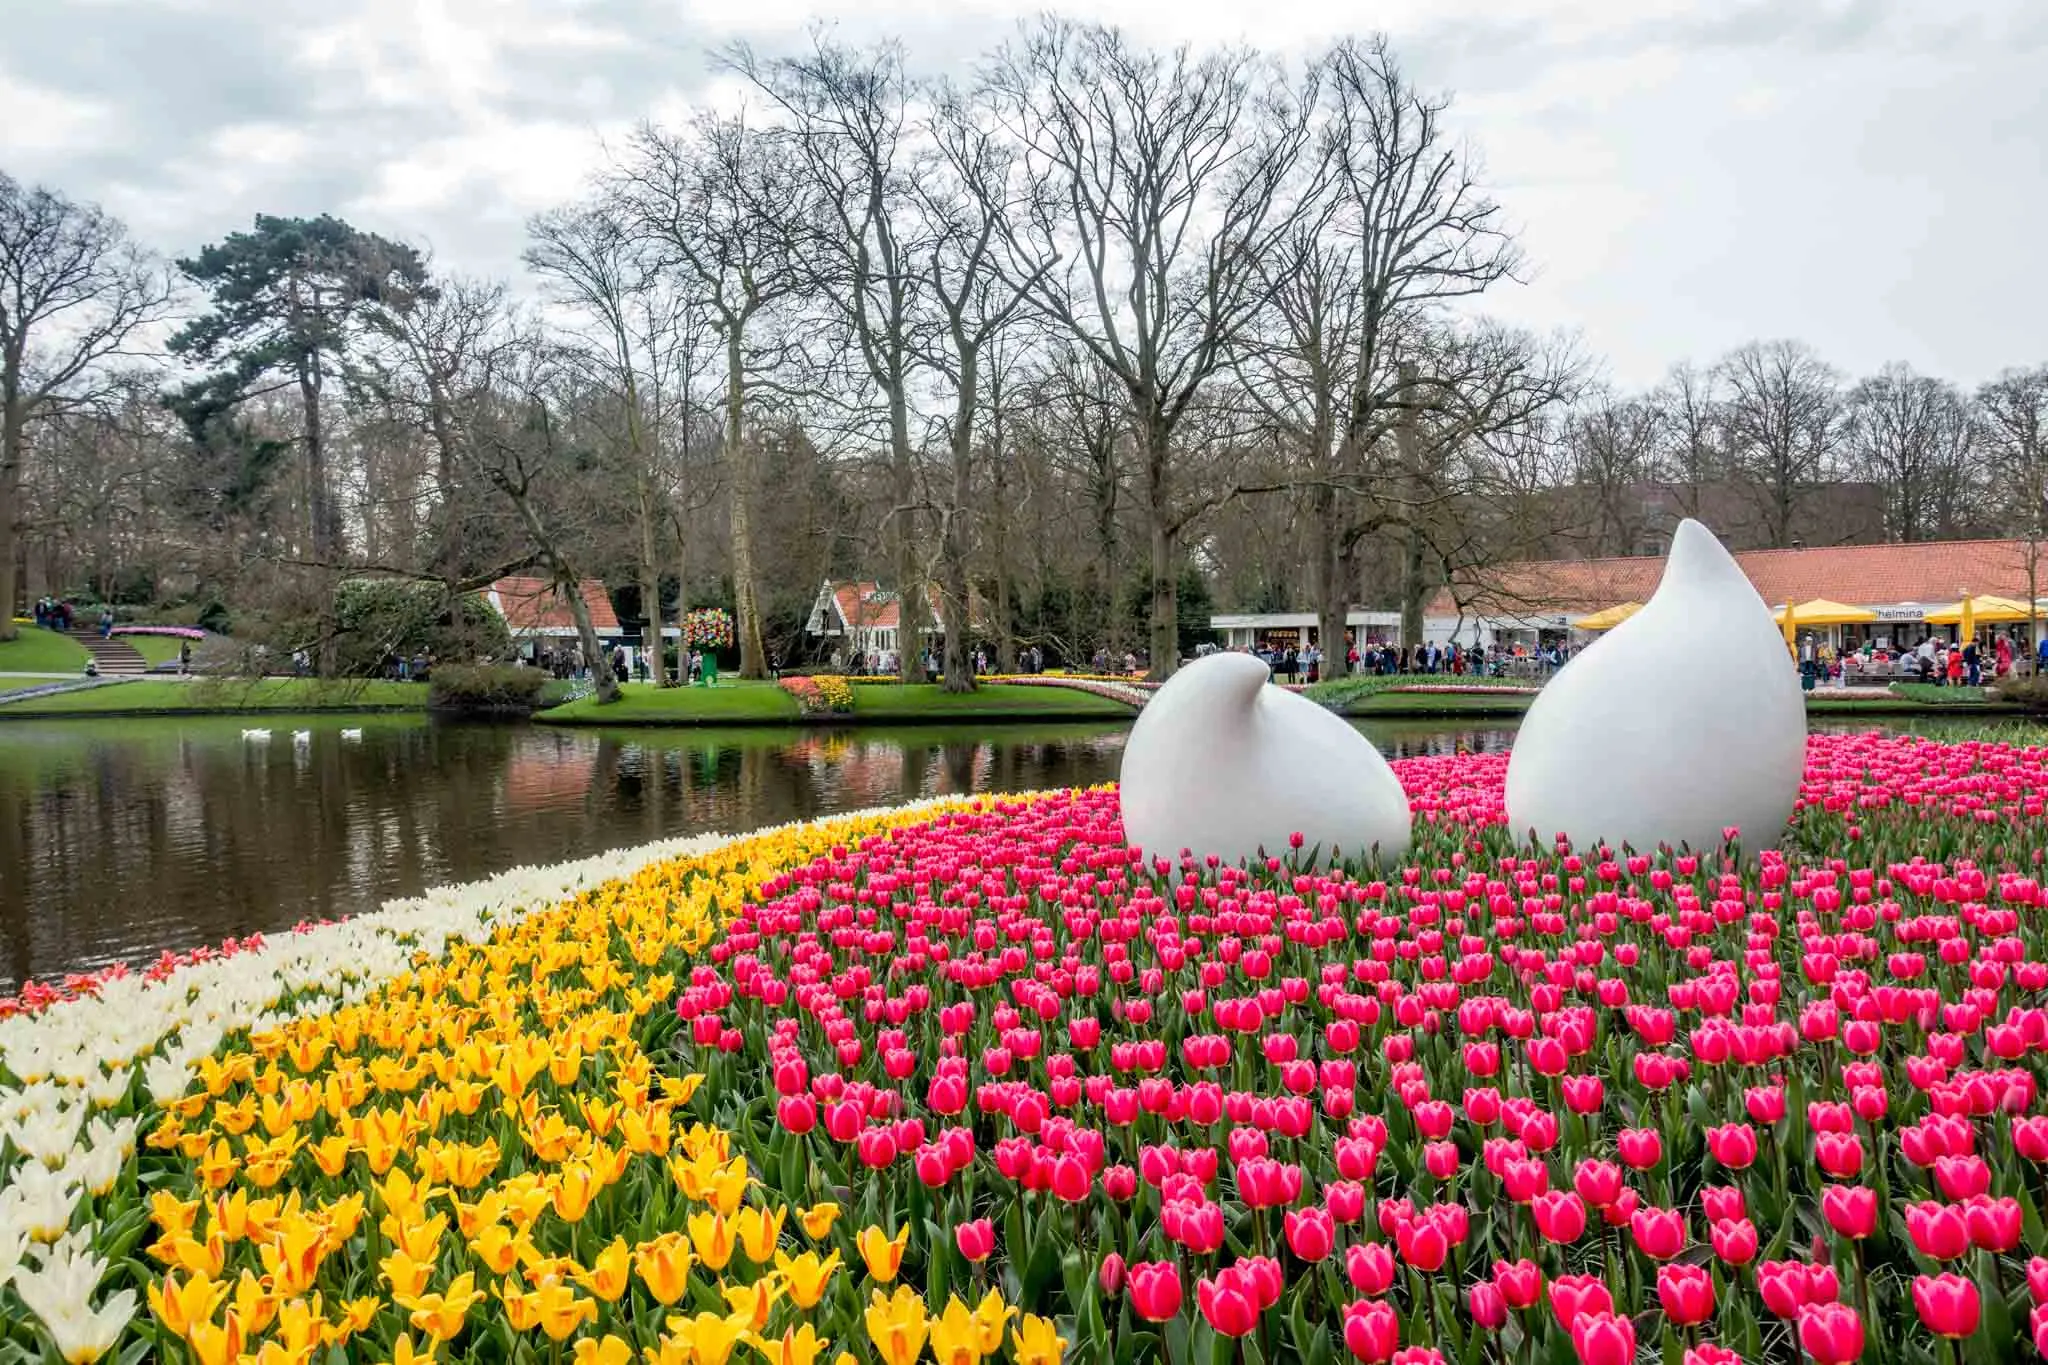 Sculpture surrounded by tulips